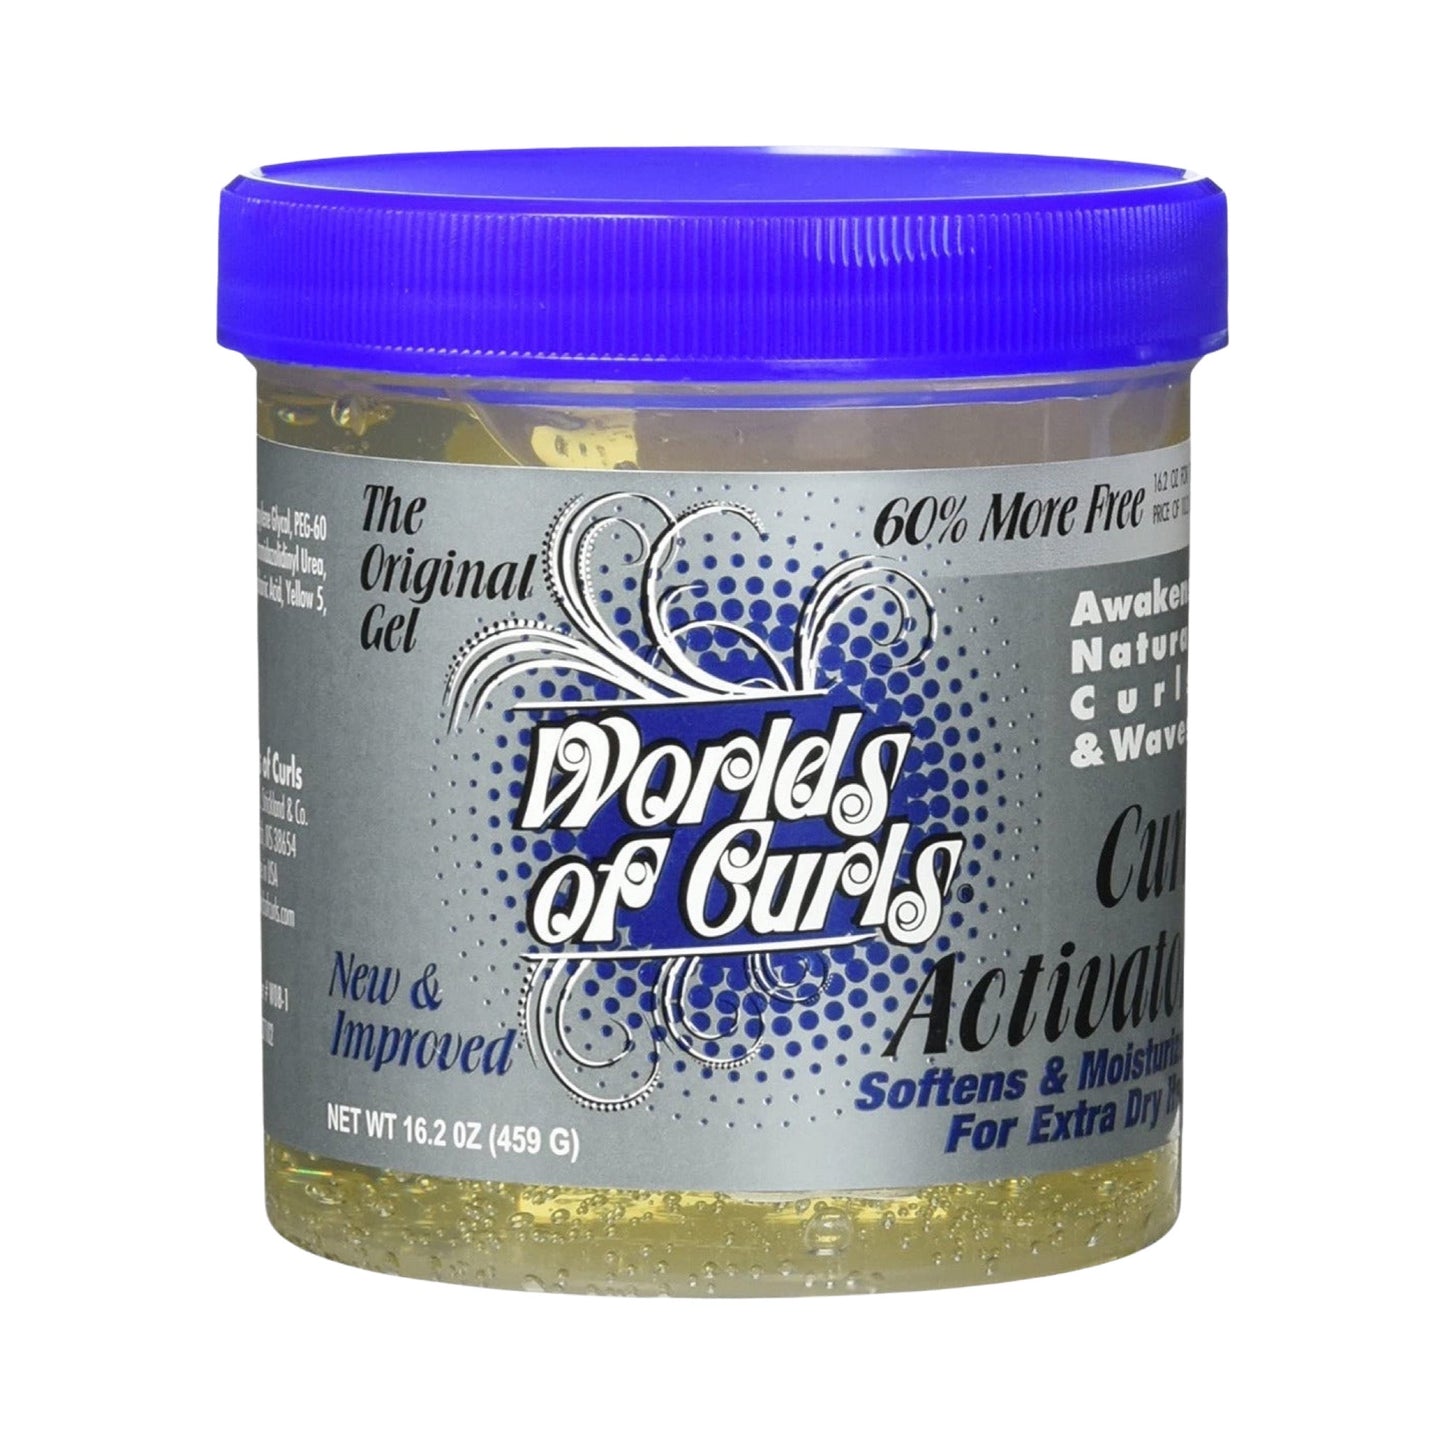 Worlds Of Curls Curl Activator (For Extra Dry Hair) Styling Gels